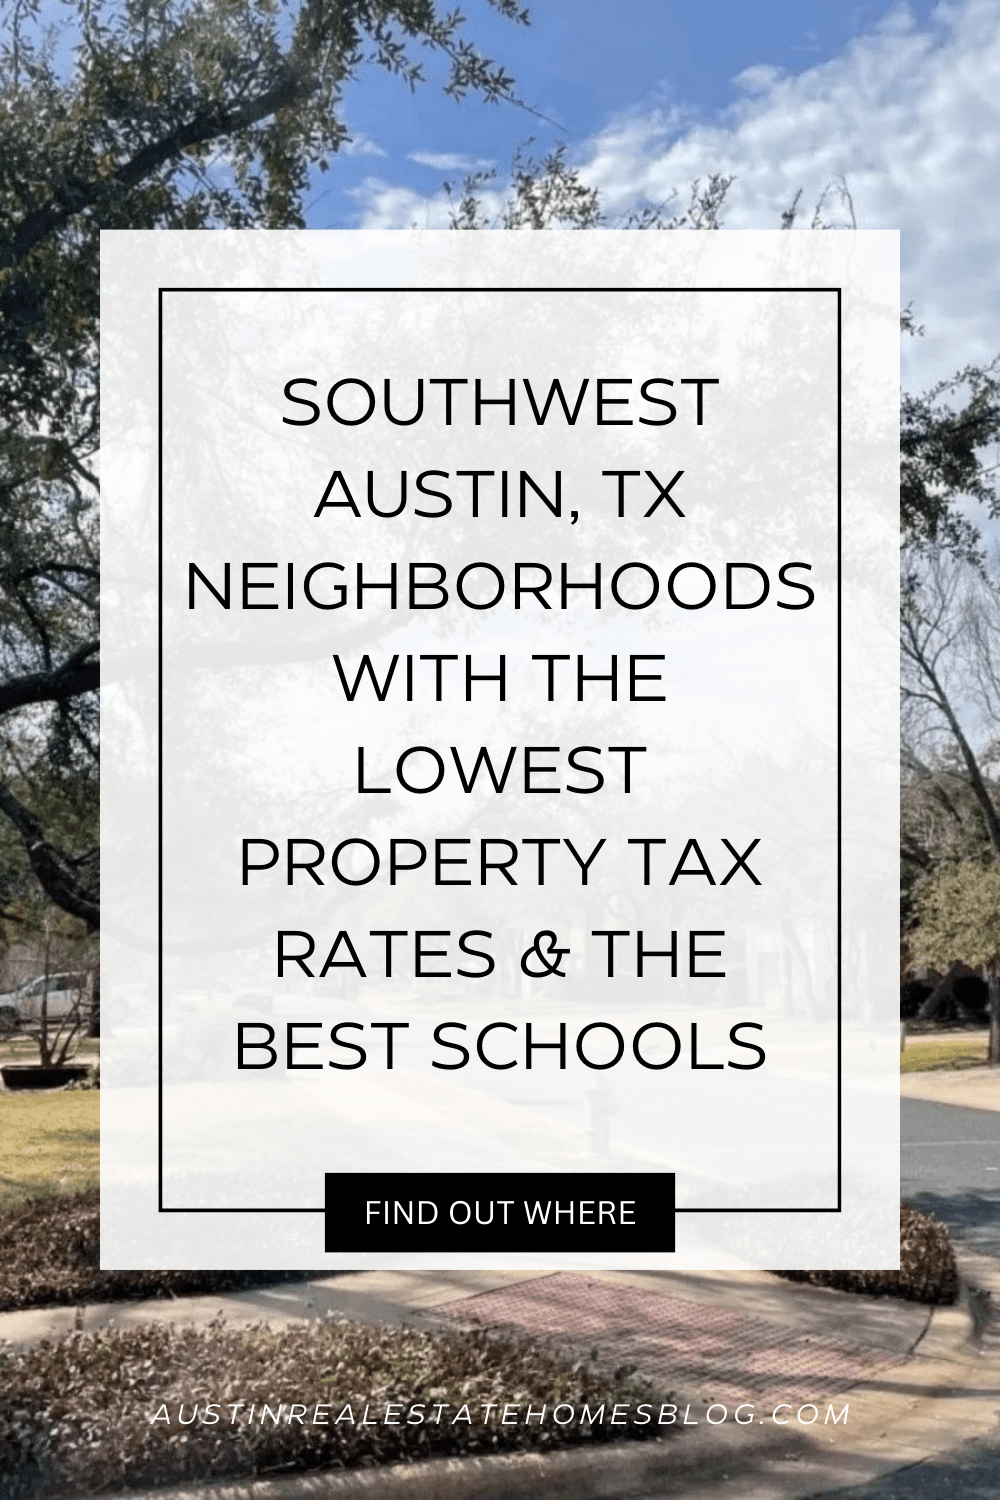 Southwest Austin TX neighborhoods with the lowest property tax rates and the best schools